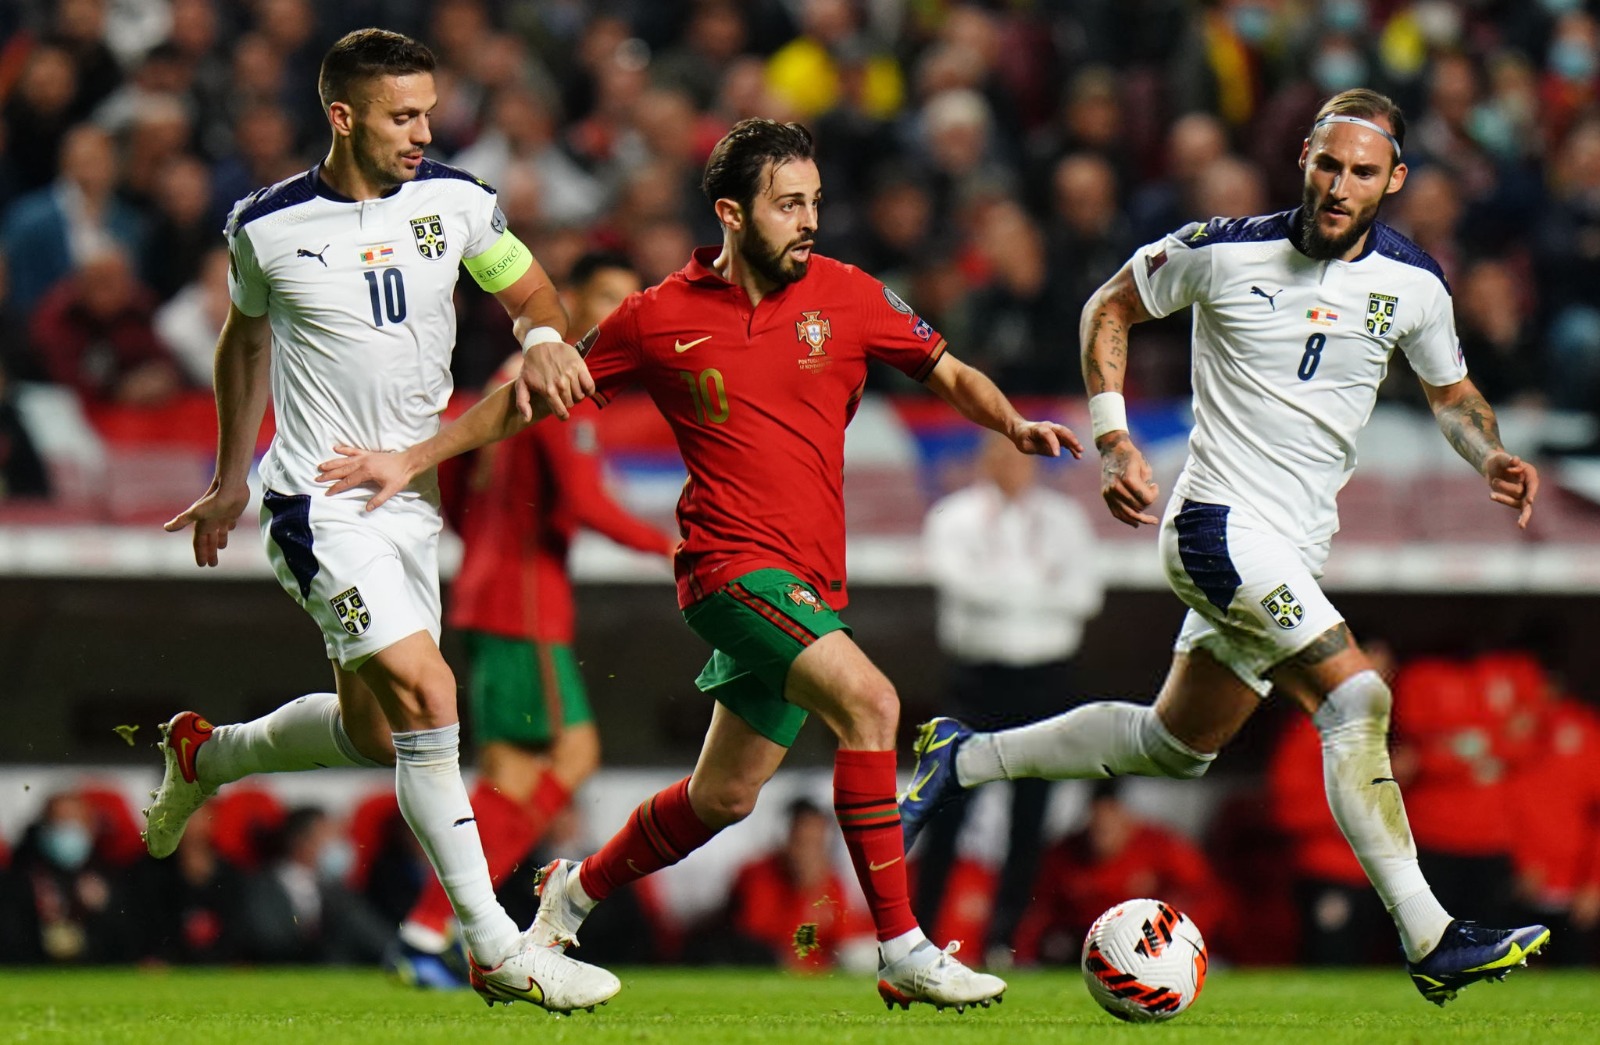 Gudelj in action in the game against Portugal 